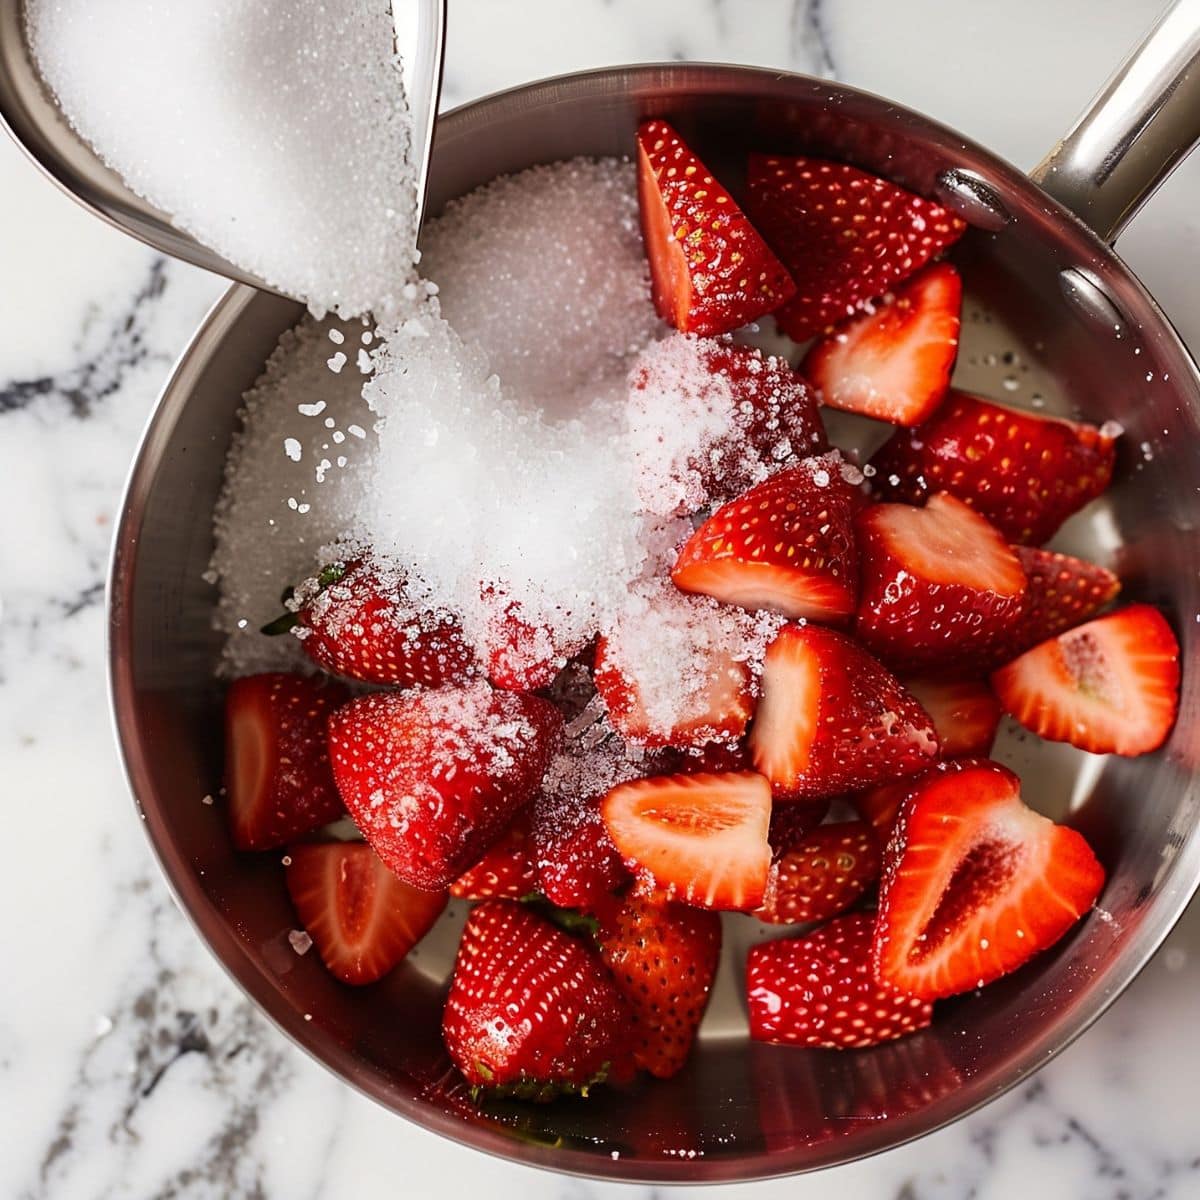 Top View of Saucepan with Halved Strawberries and Granulated Sugar on a White Marble Table